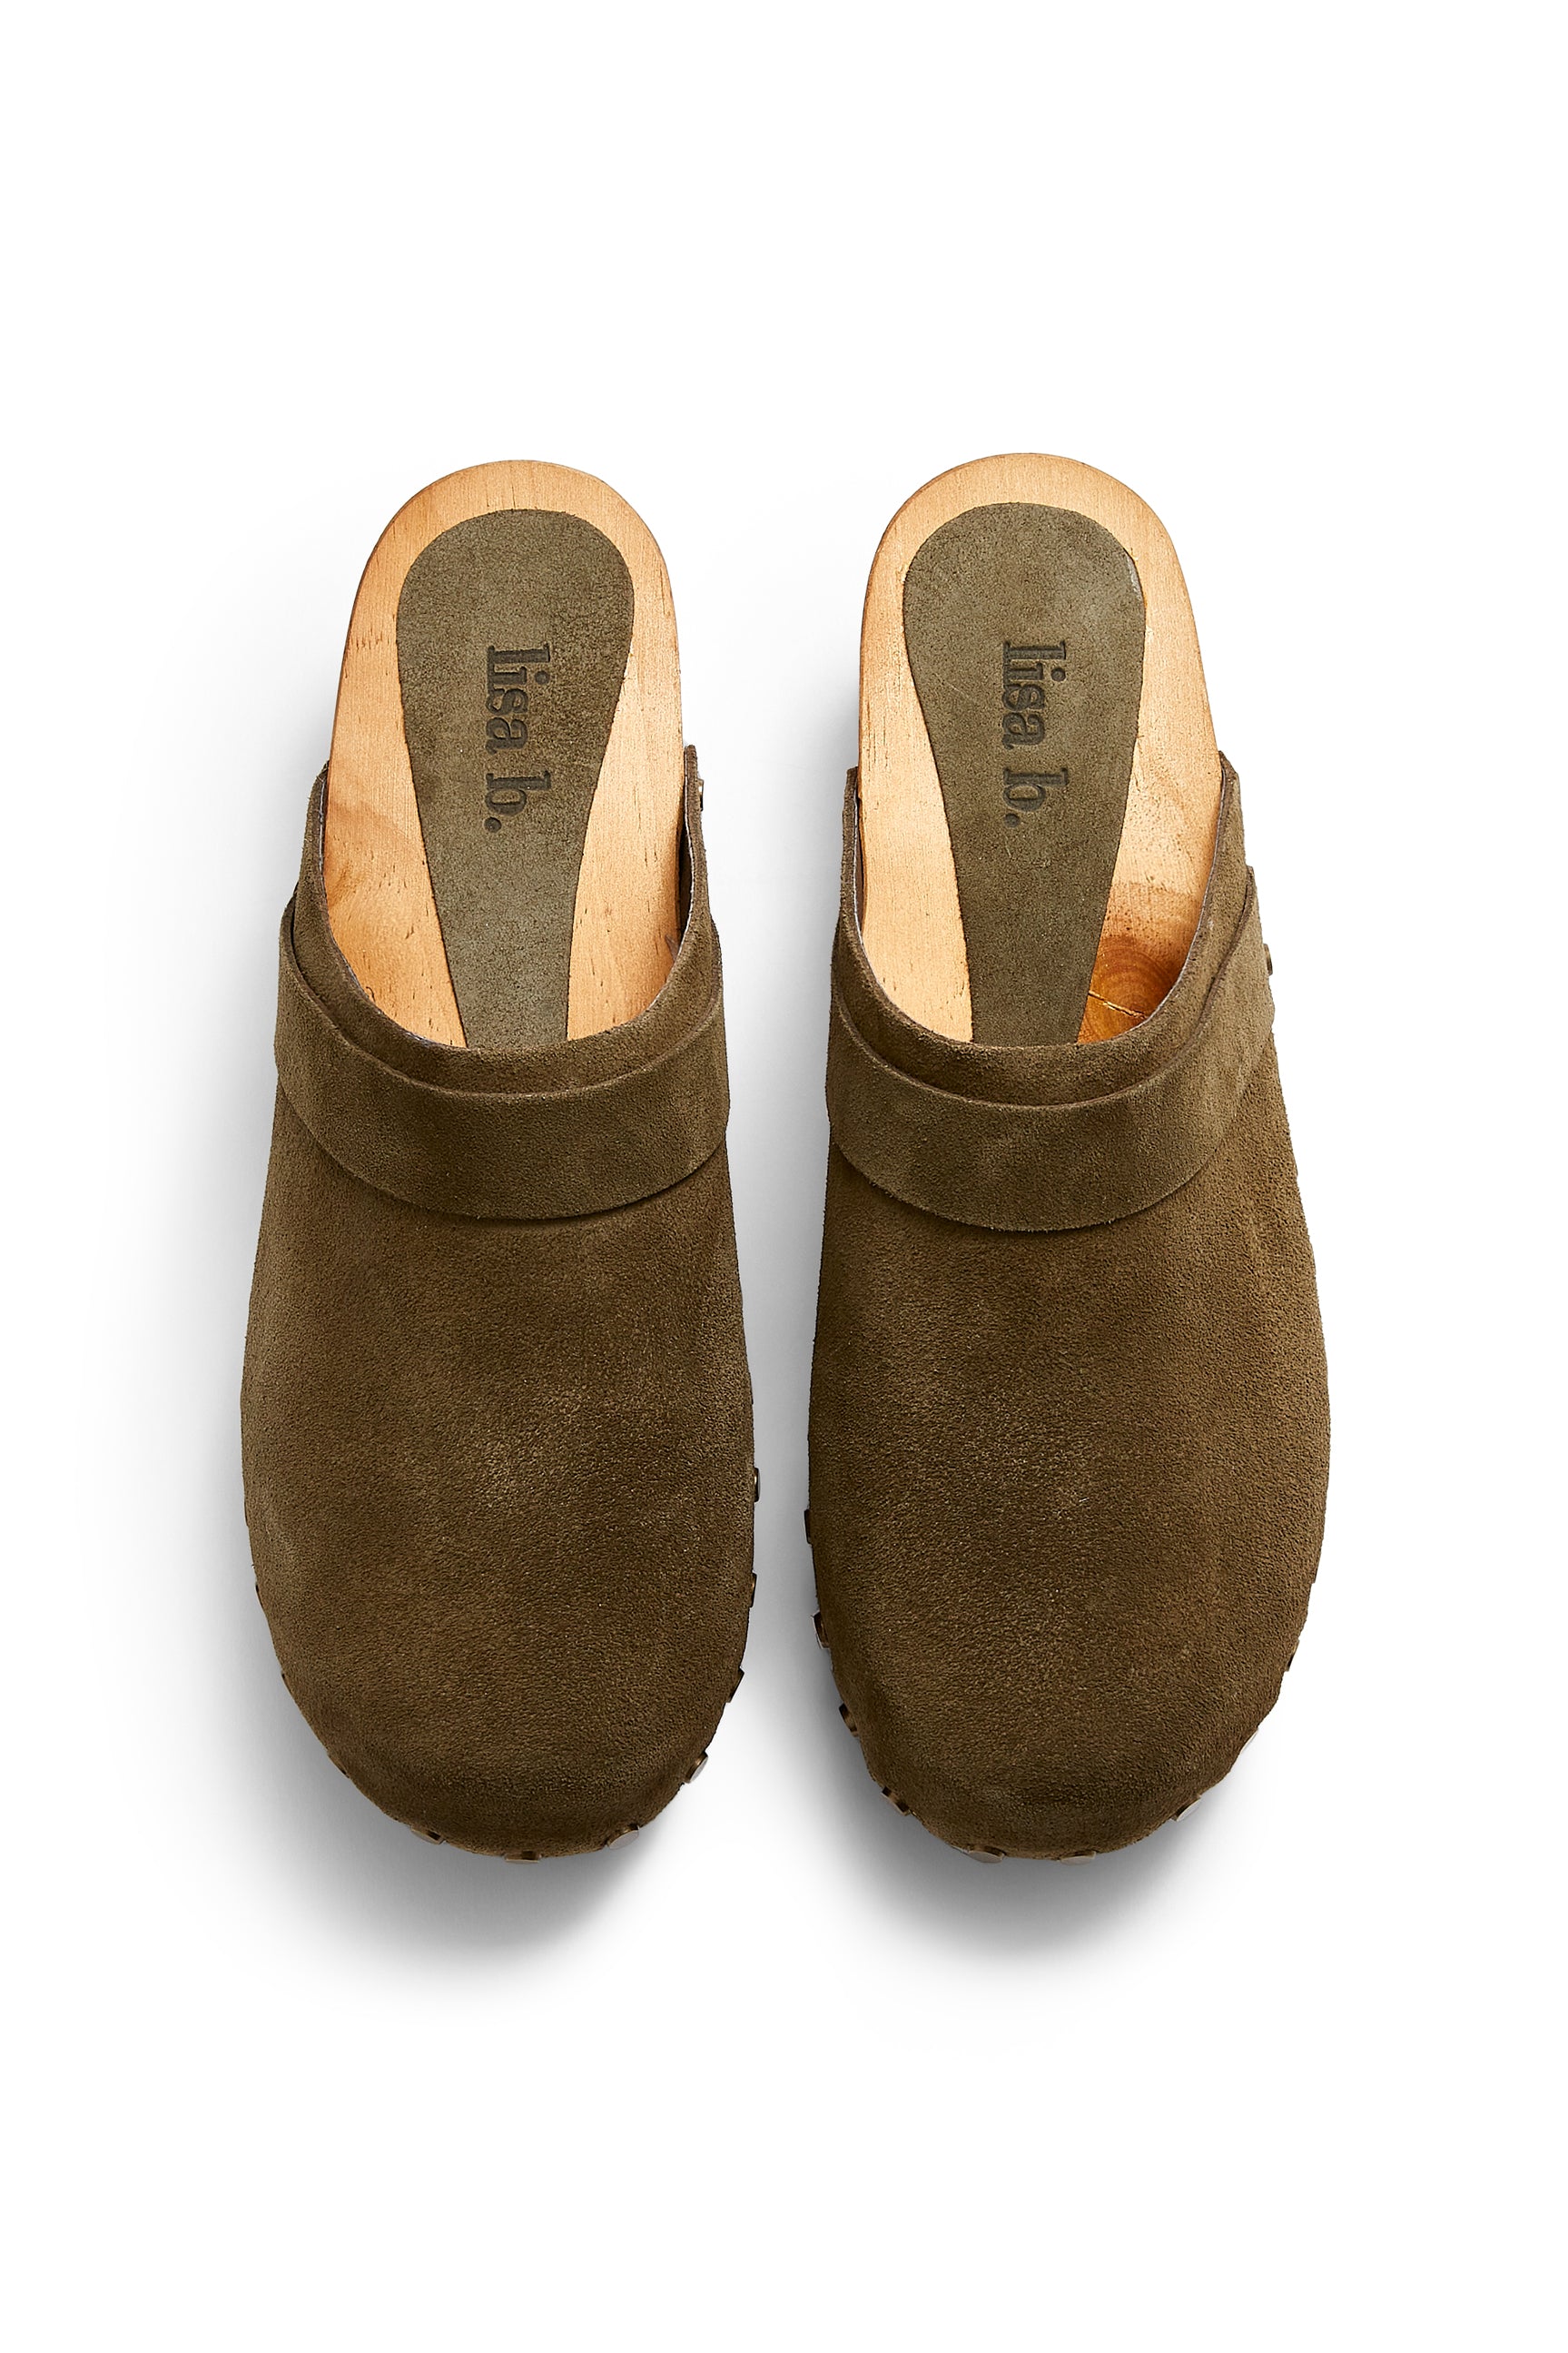 low heel classic clogs in olive suede - Clogs lisa b.